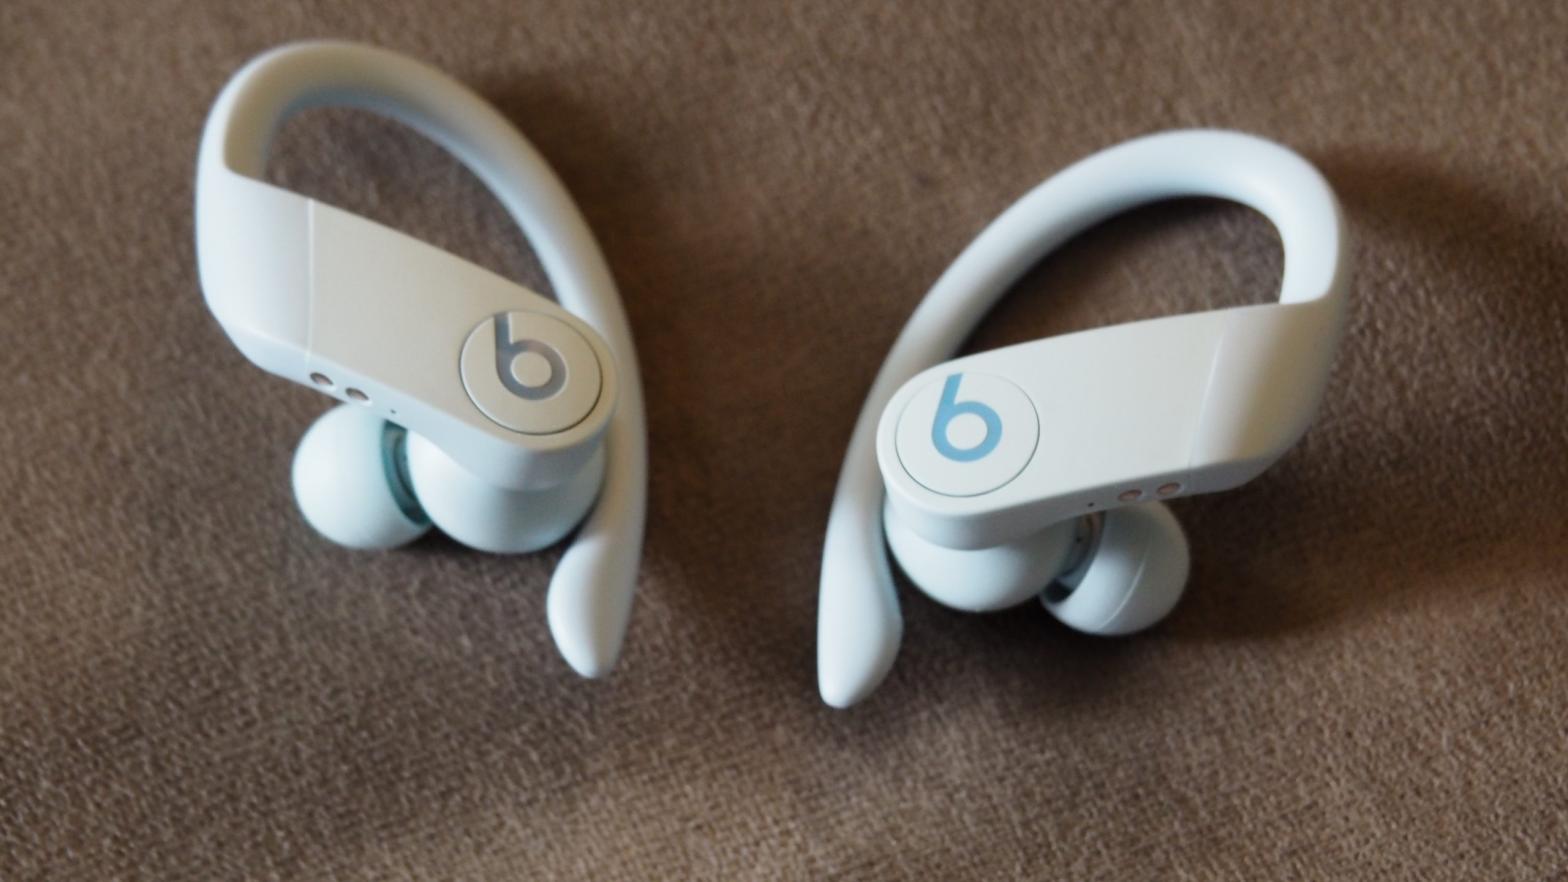 The new Glacier Blue Powerbeats Pro are as pale as their name suggests. (Photo: Caitlin McGarry, Gizmodo)